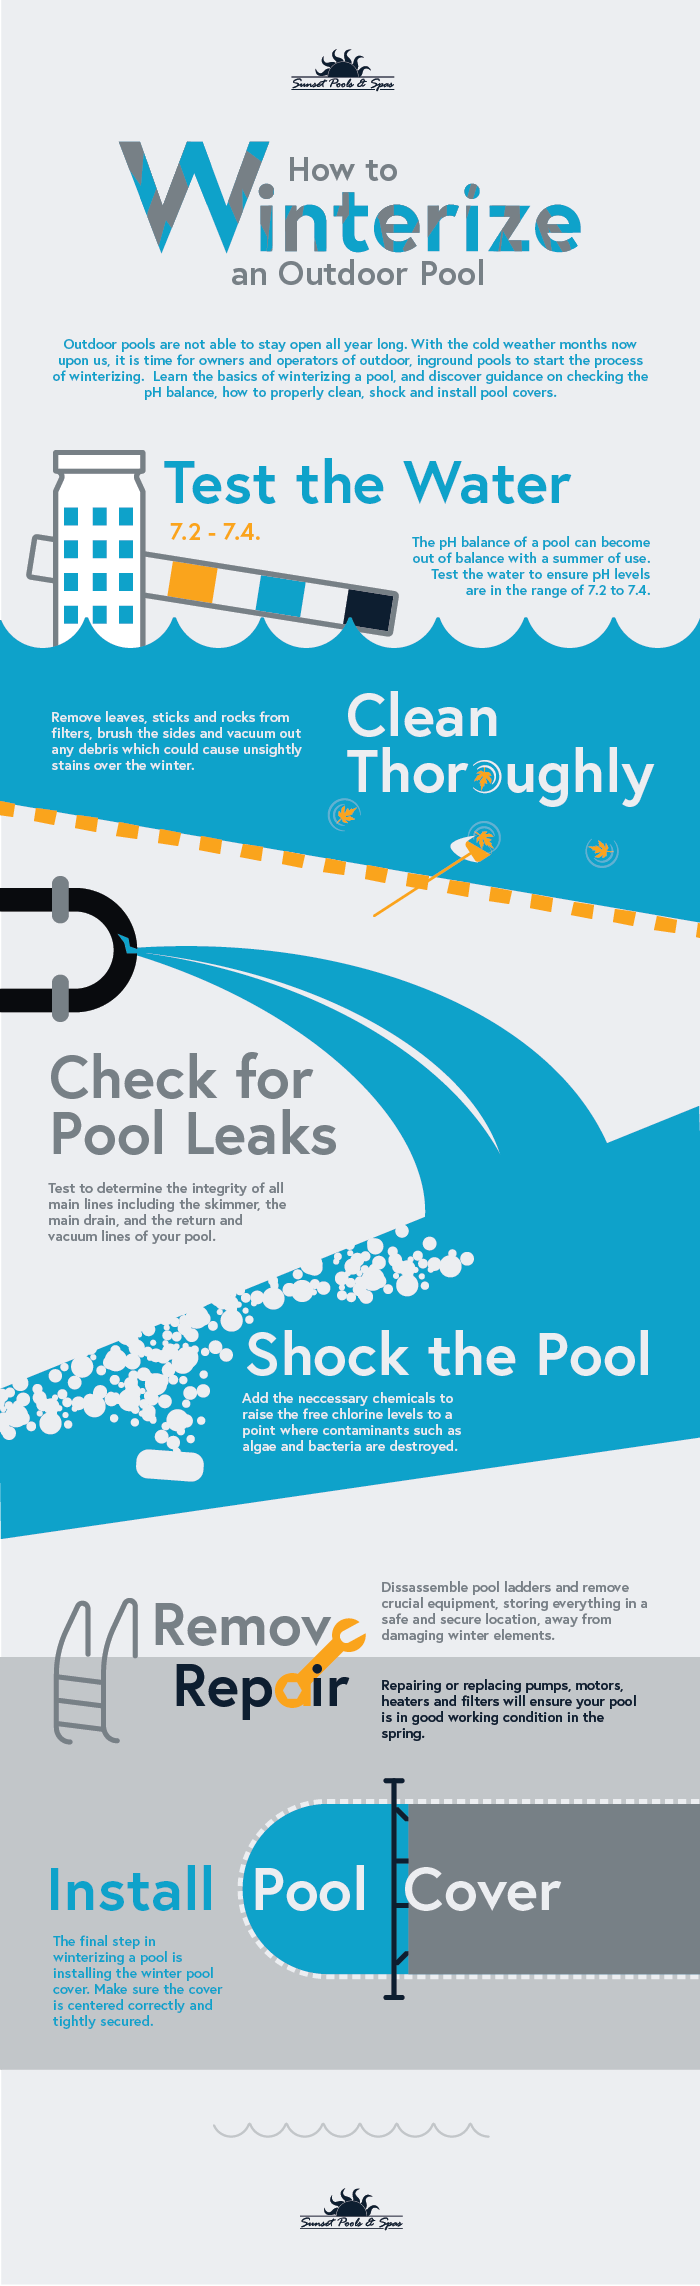 How To Winterize a Pool Infographic